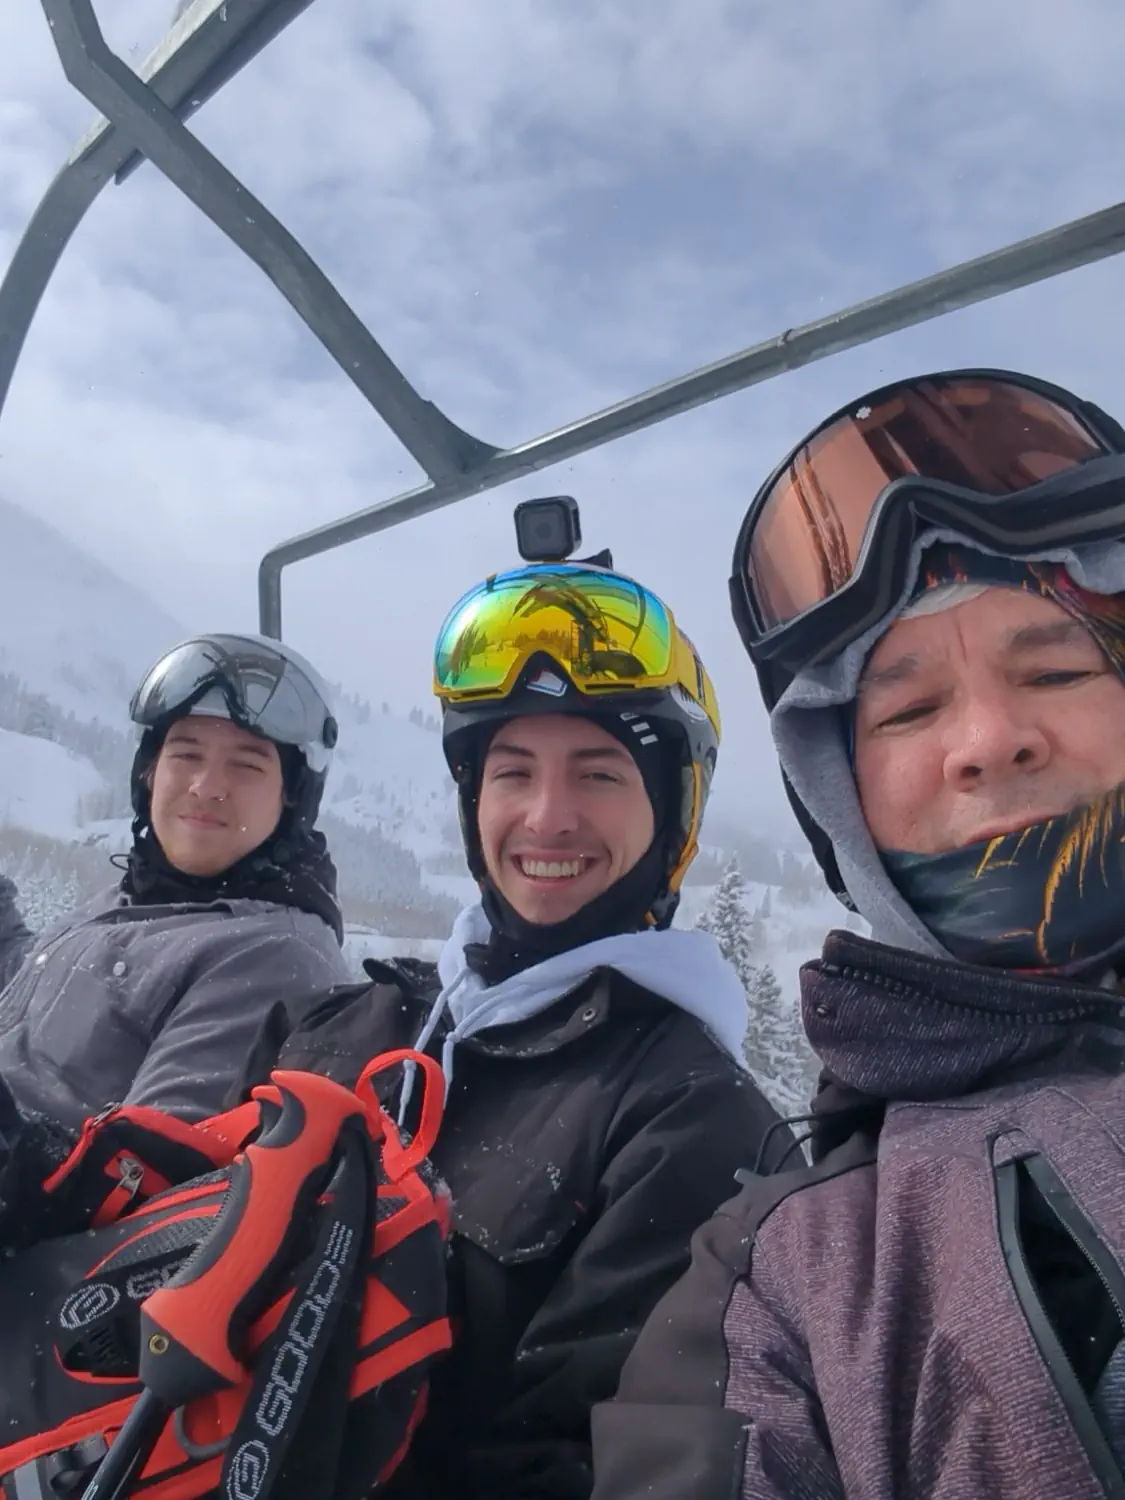 Barry, Joe, and Cooper are enjoying a powder day at Brighton Resort in Big Cottonwood Canyon